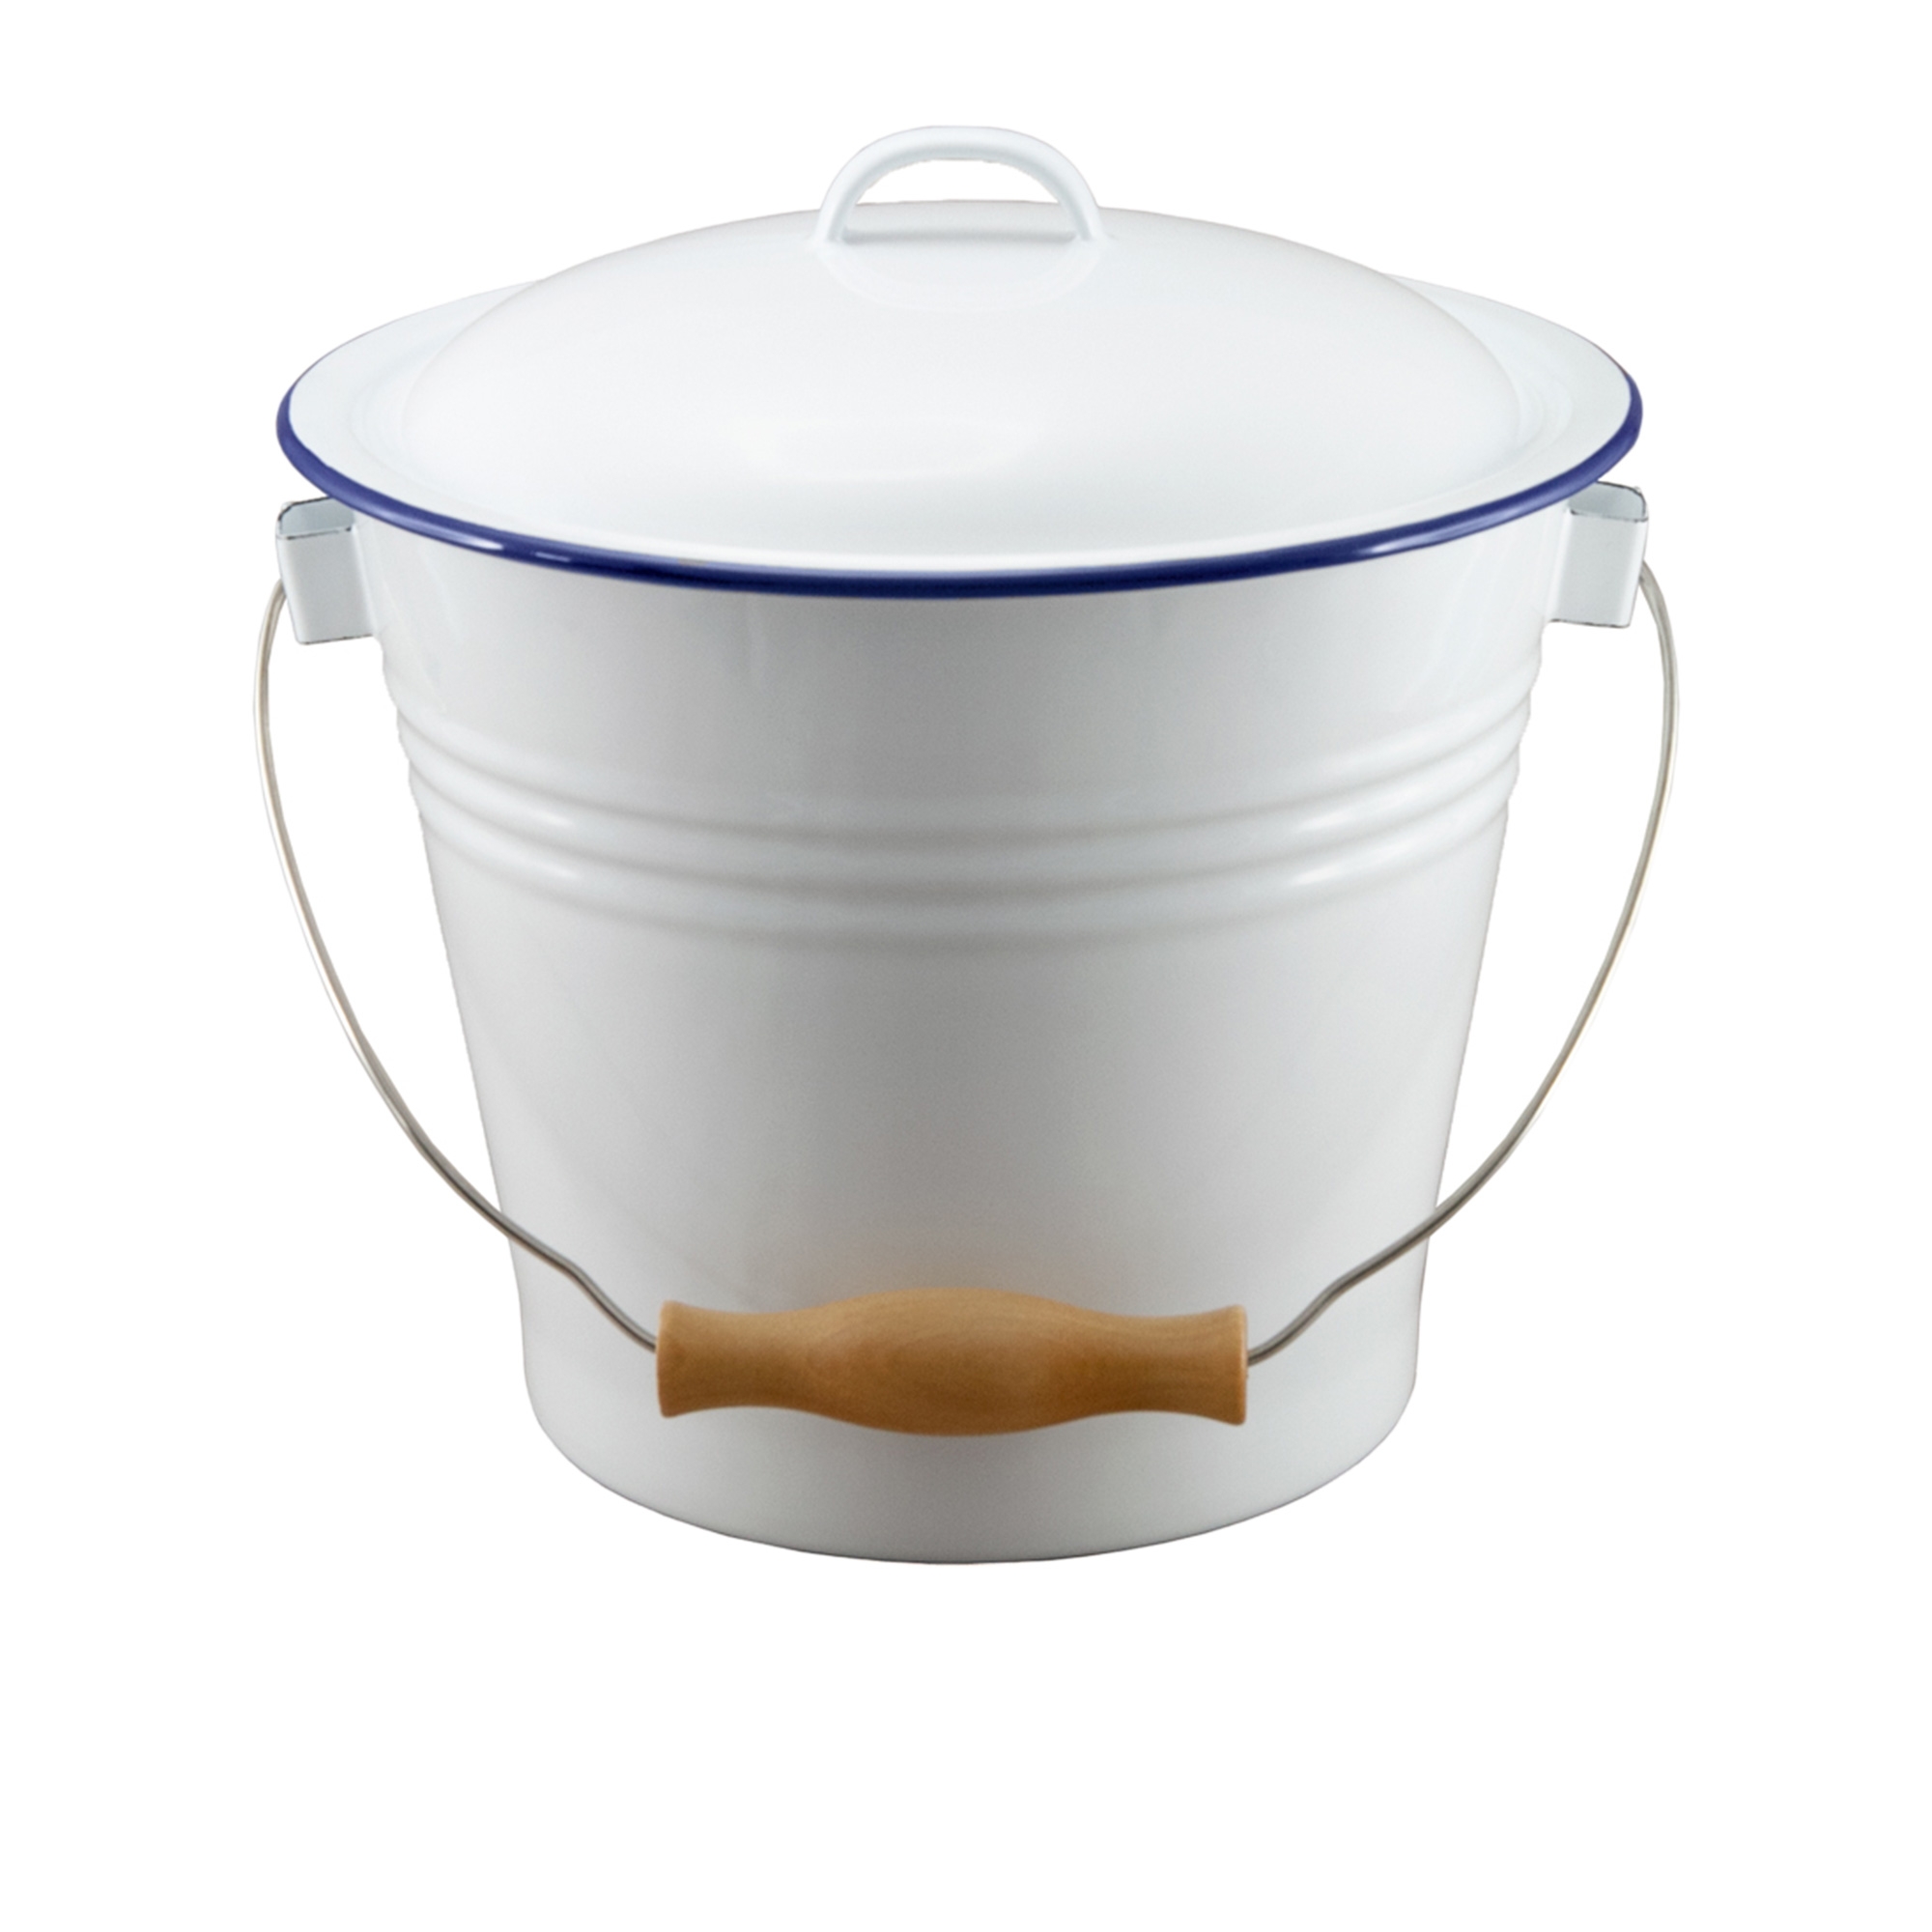 Falcon Enamelware Bucket with Lid 5L White Image 1